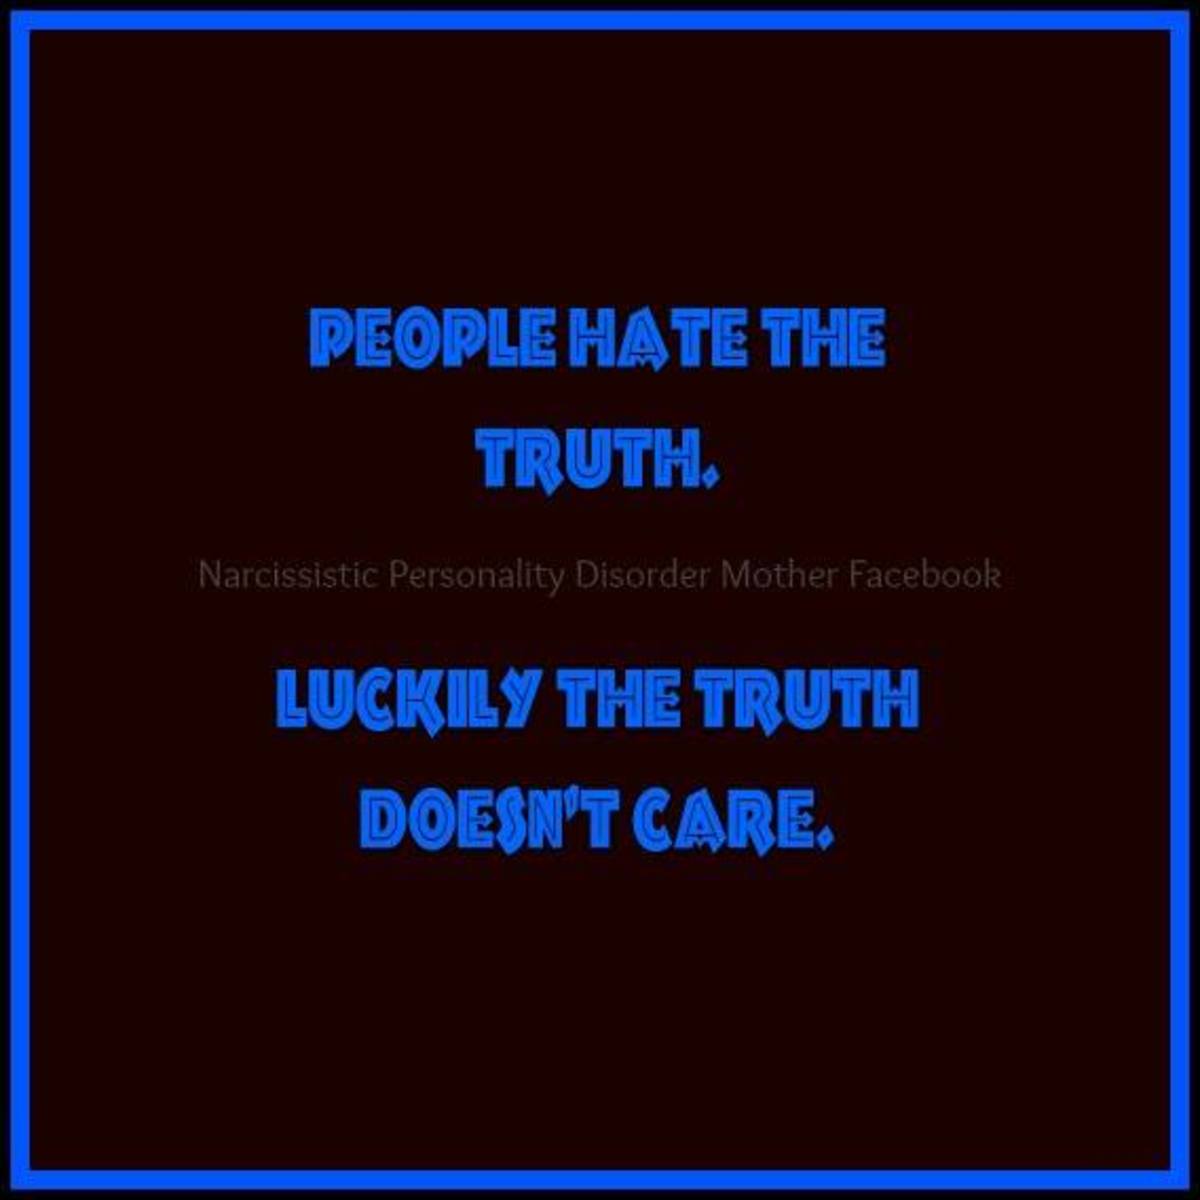 People hate the truth. Luckily the truth doesn't care. 